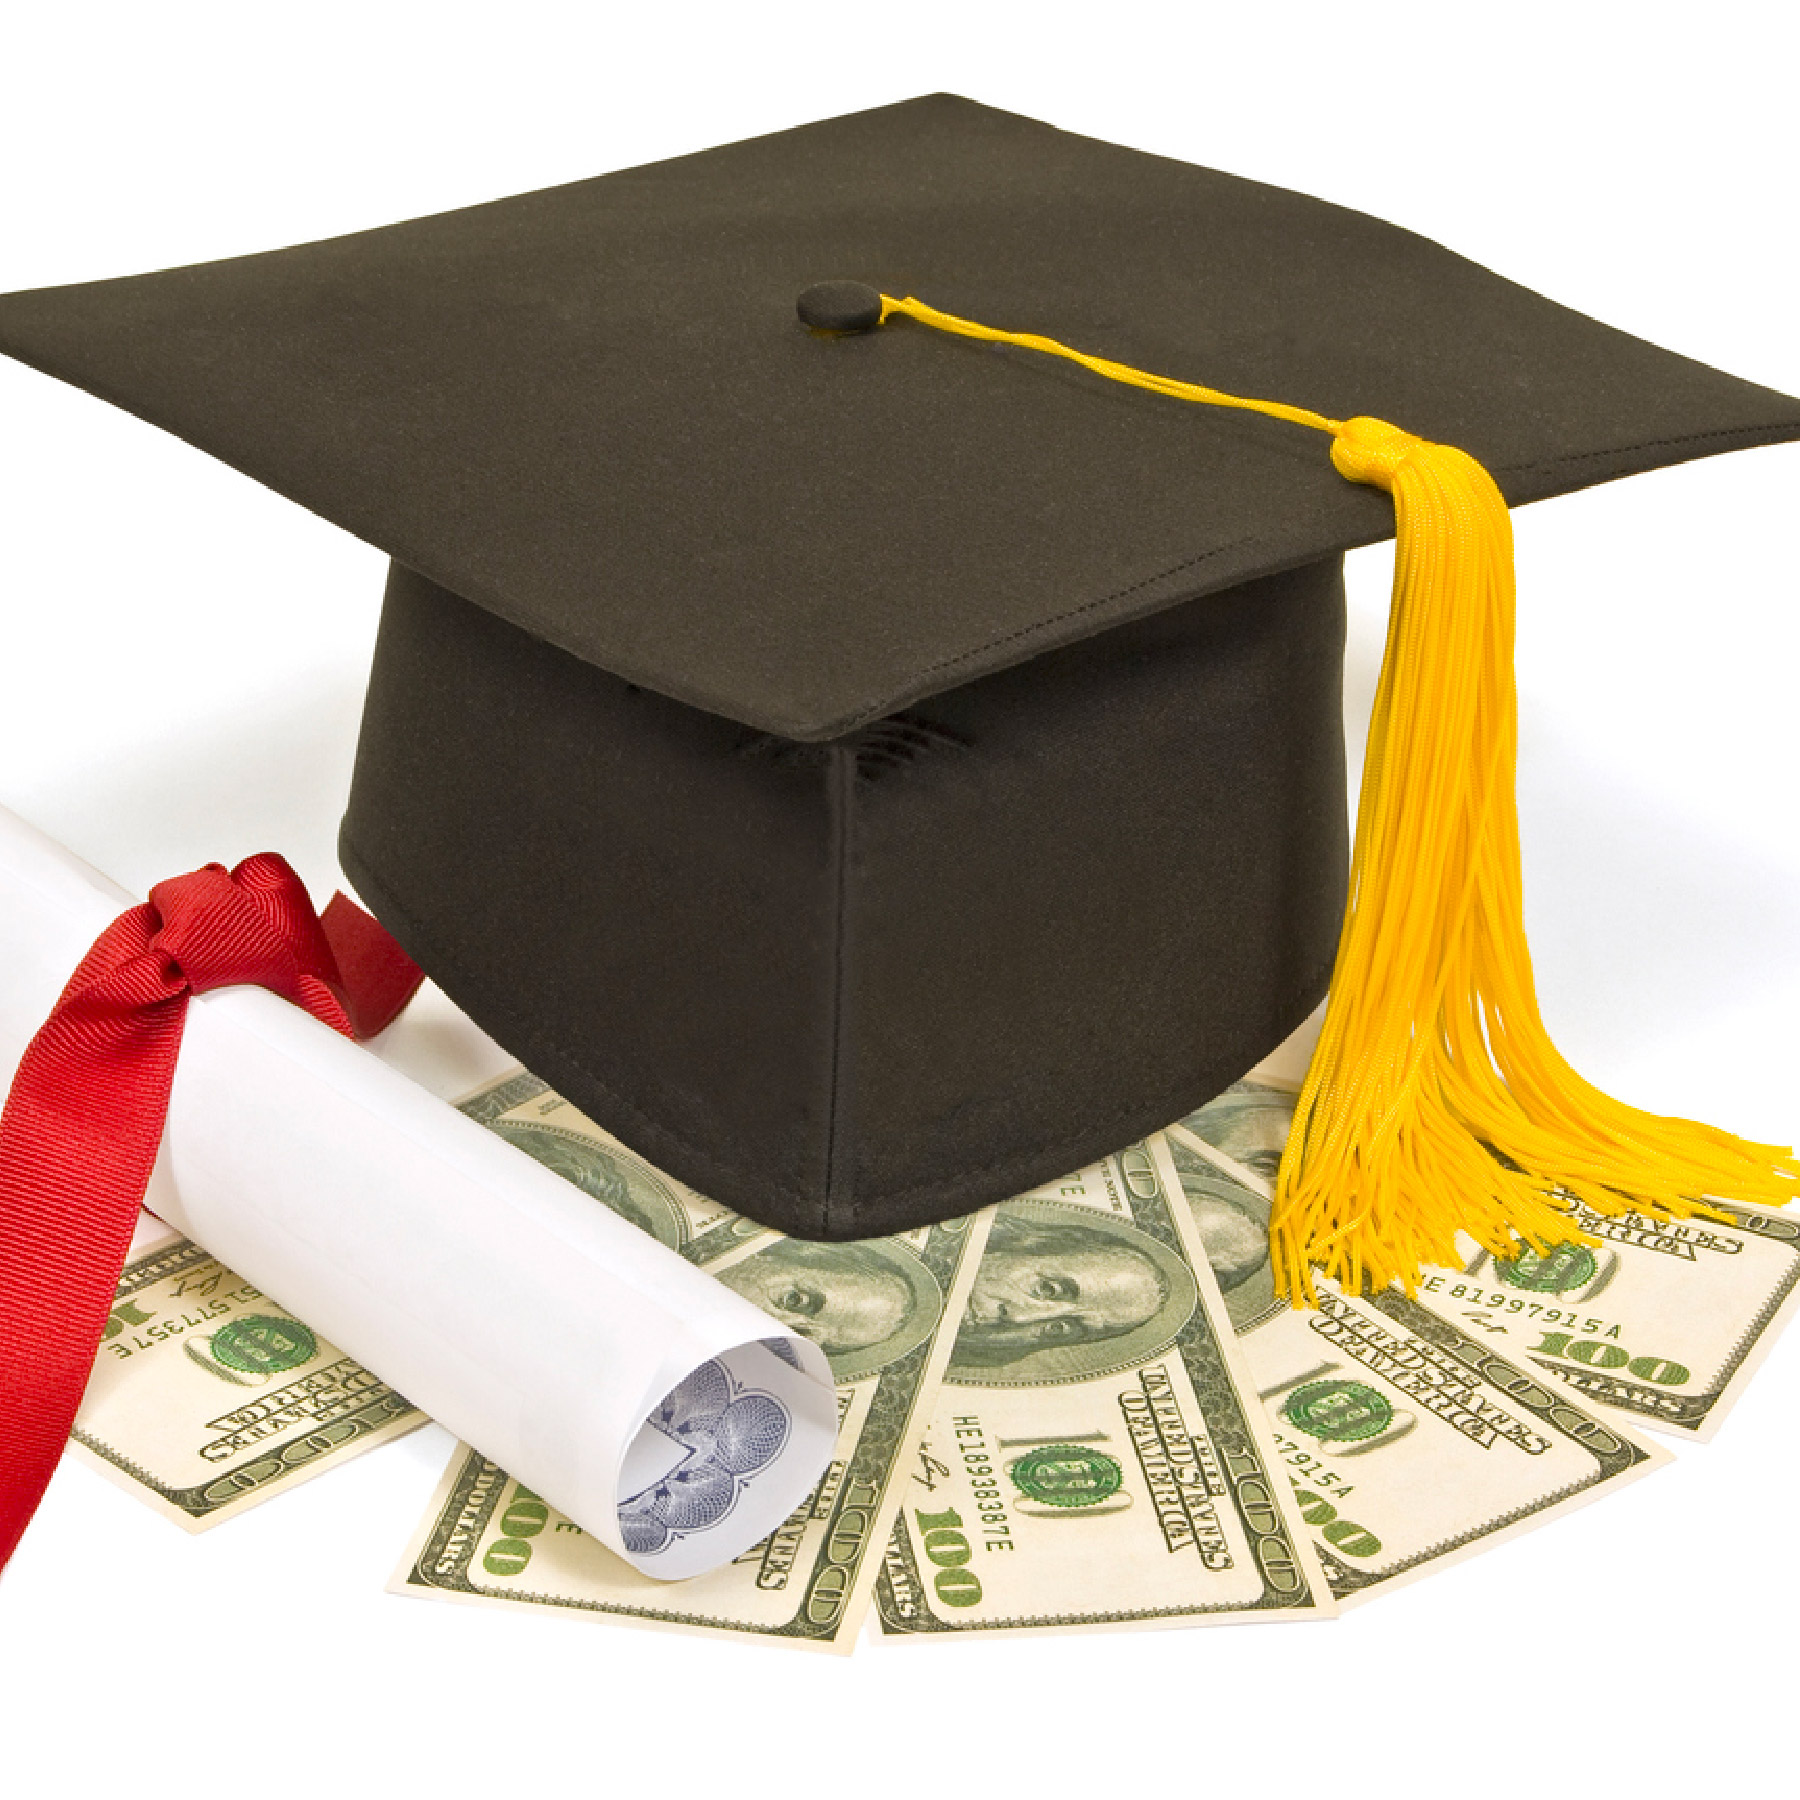 Graduation cap and diploma on top on money